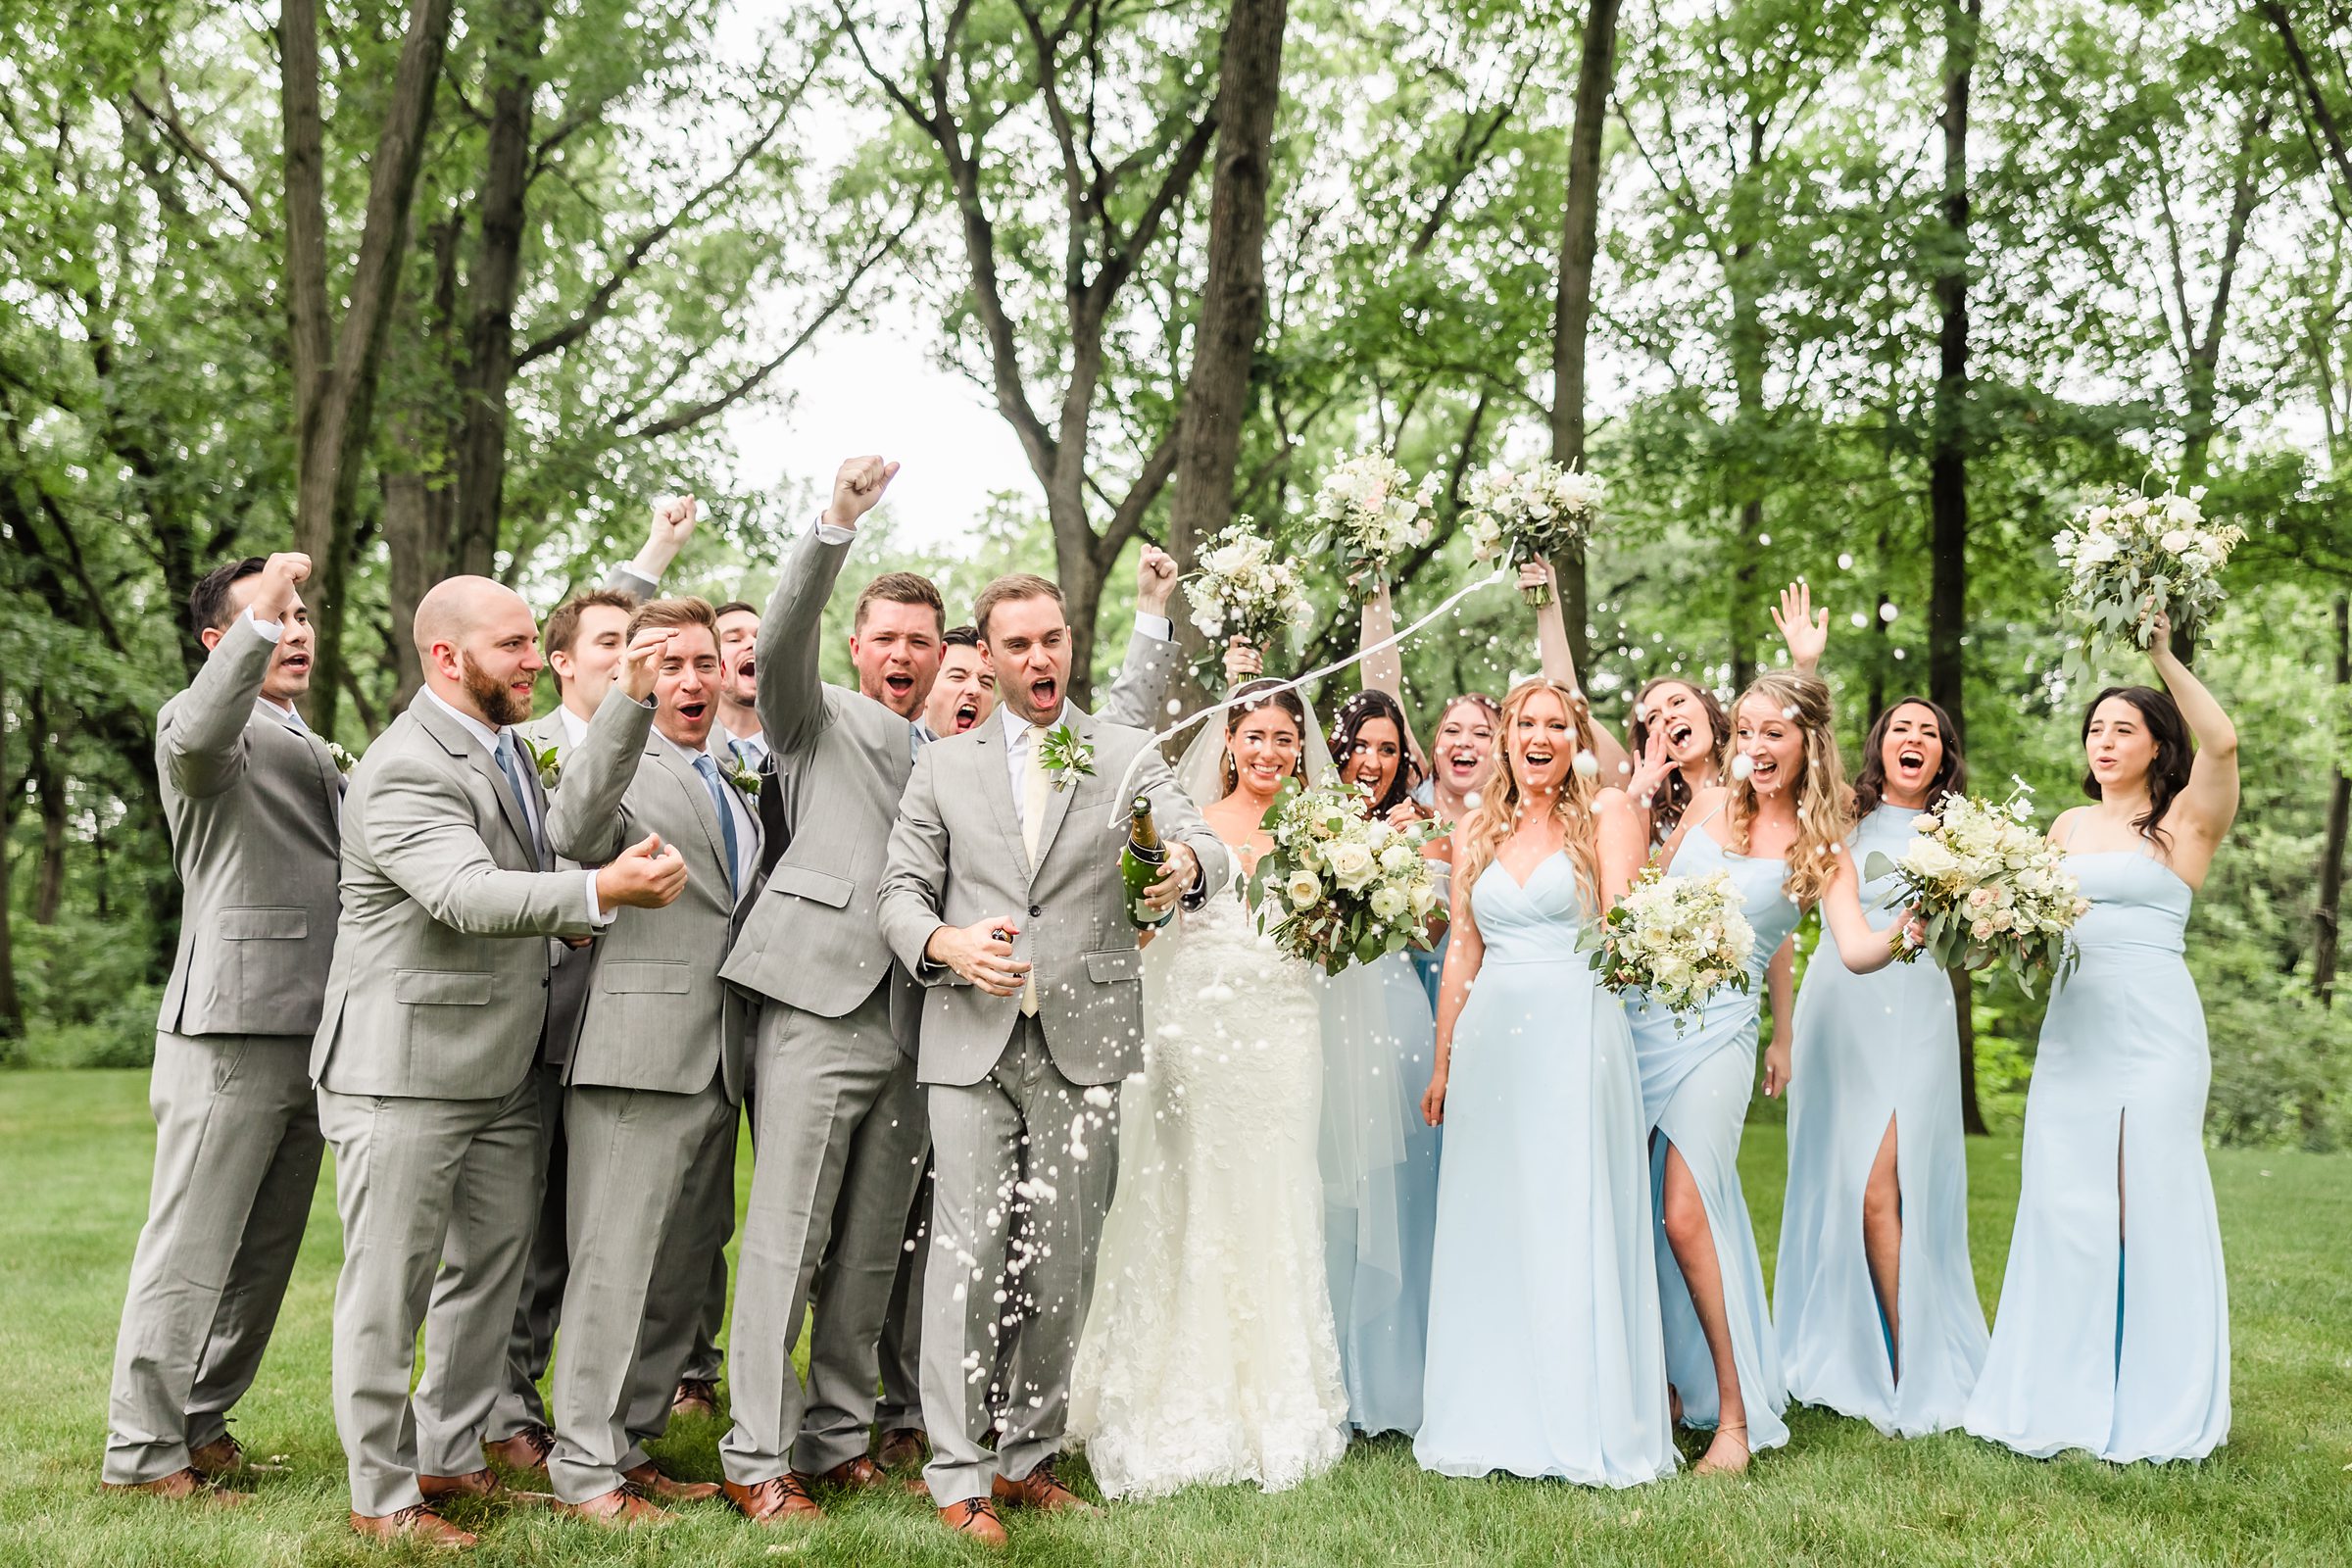 Bride & Groom celebrate their wedding with their bridal party at the Monte Bello Estate in Lemont, Illinois.